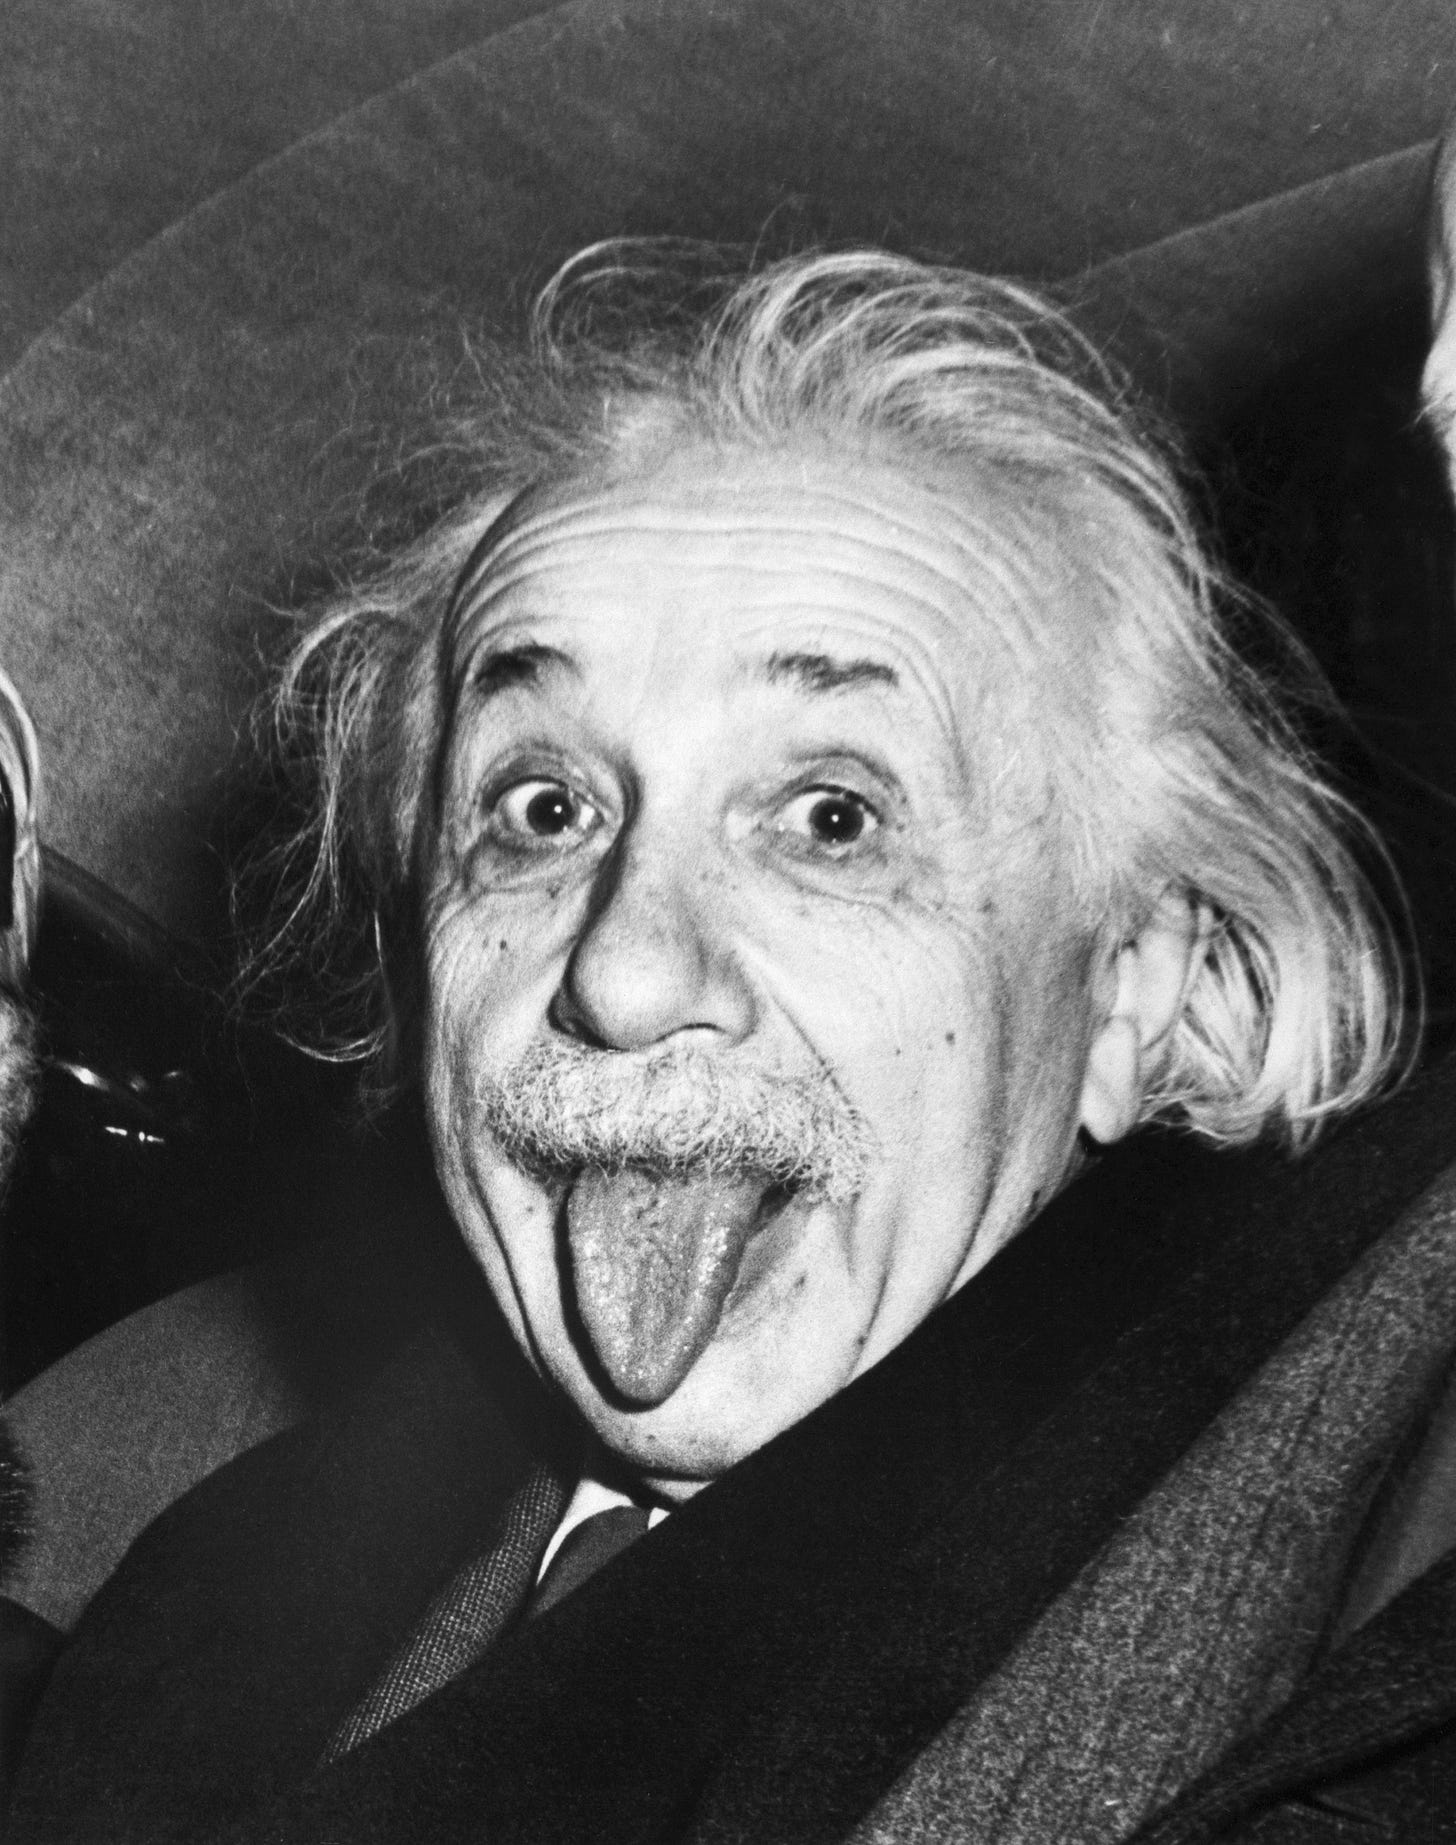 Picture of Albert Einstein sticking his tongue out jokingly